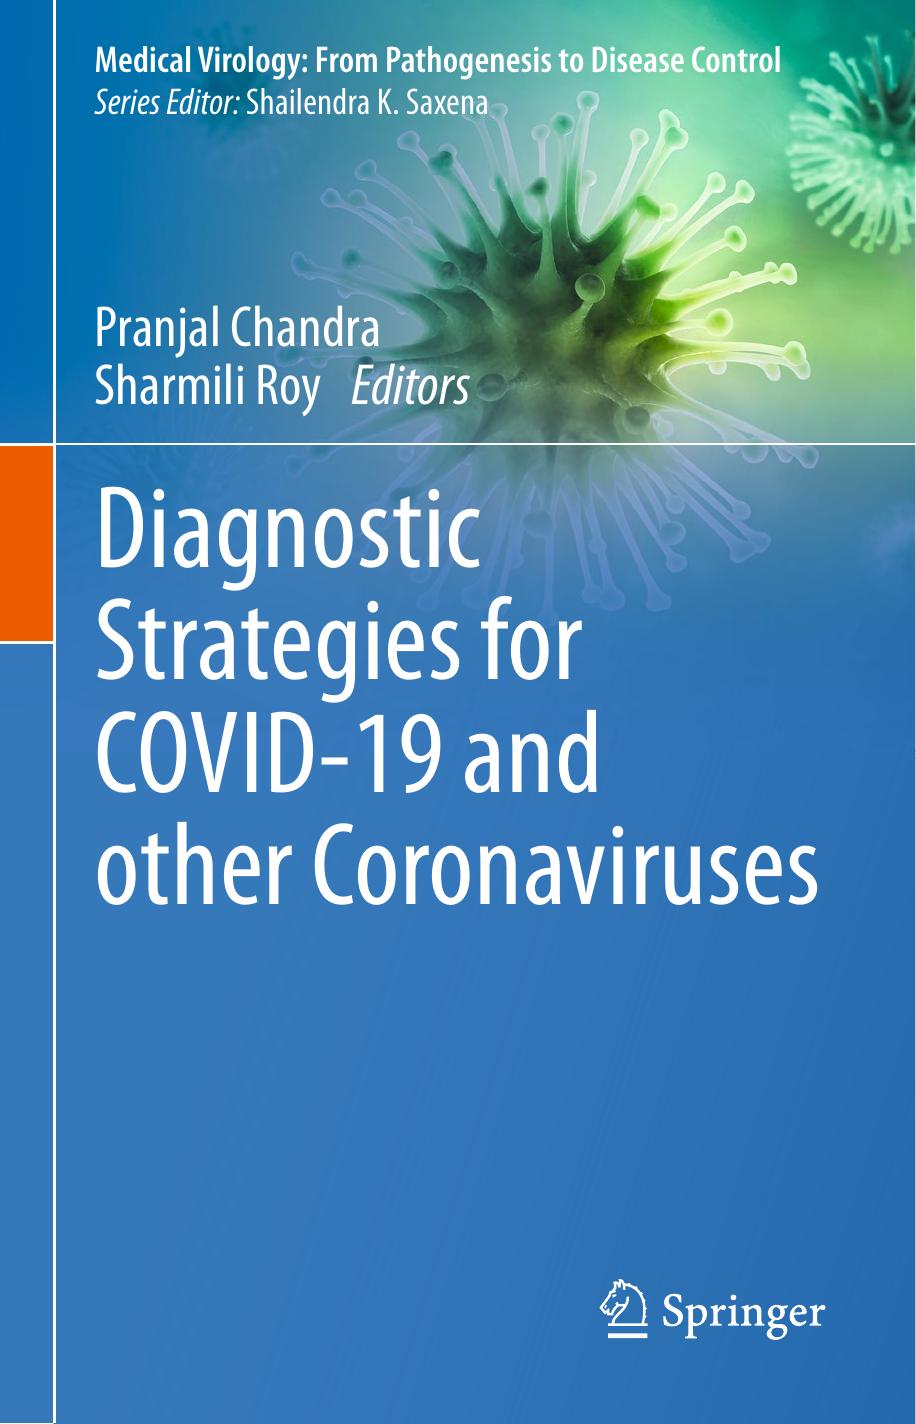 Diagnostic Strategies for COVID-19 and other Coronaviruses (2020)